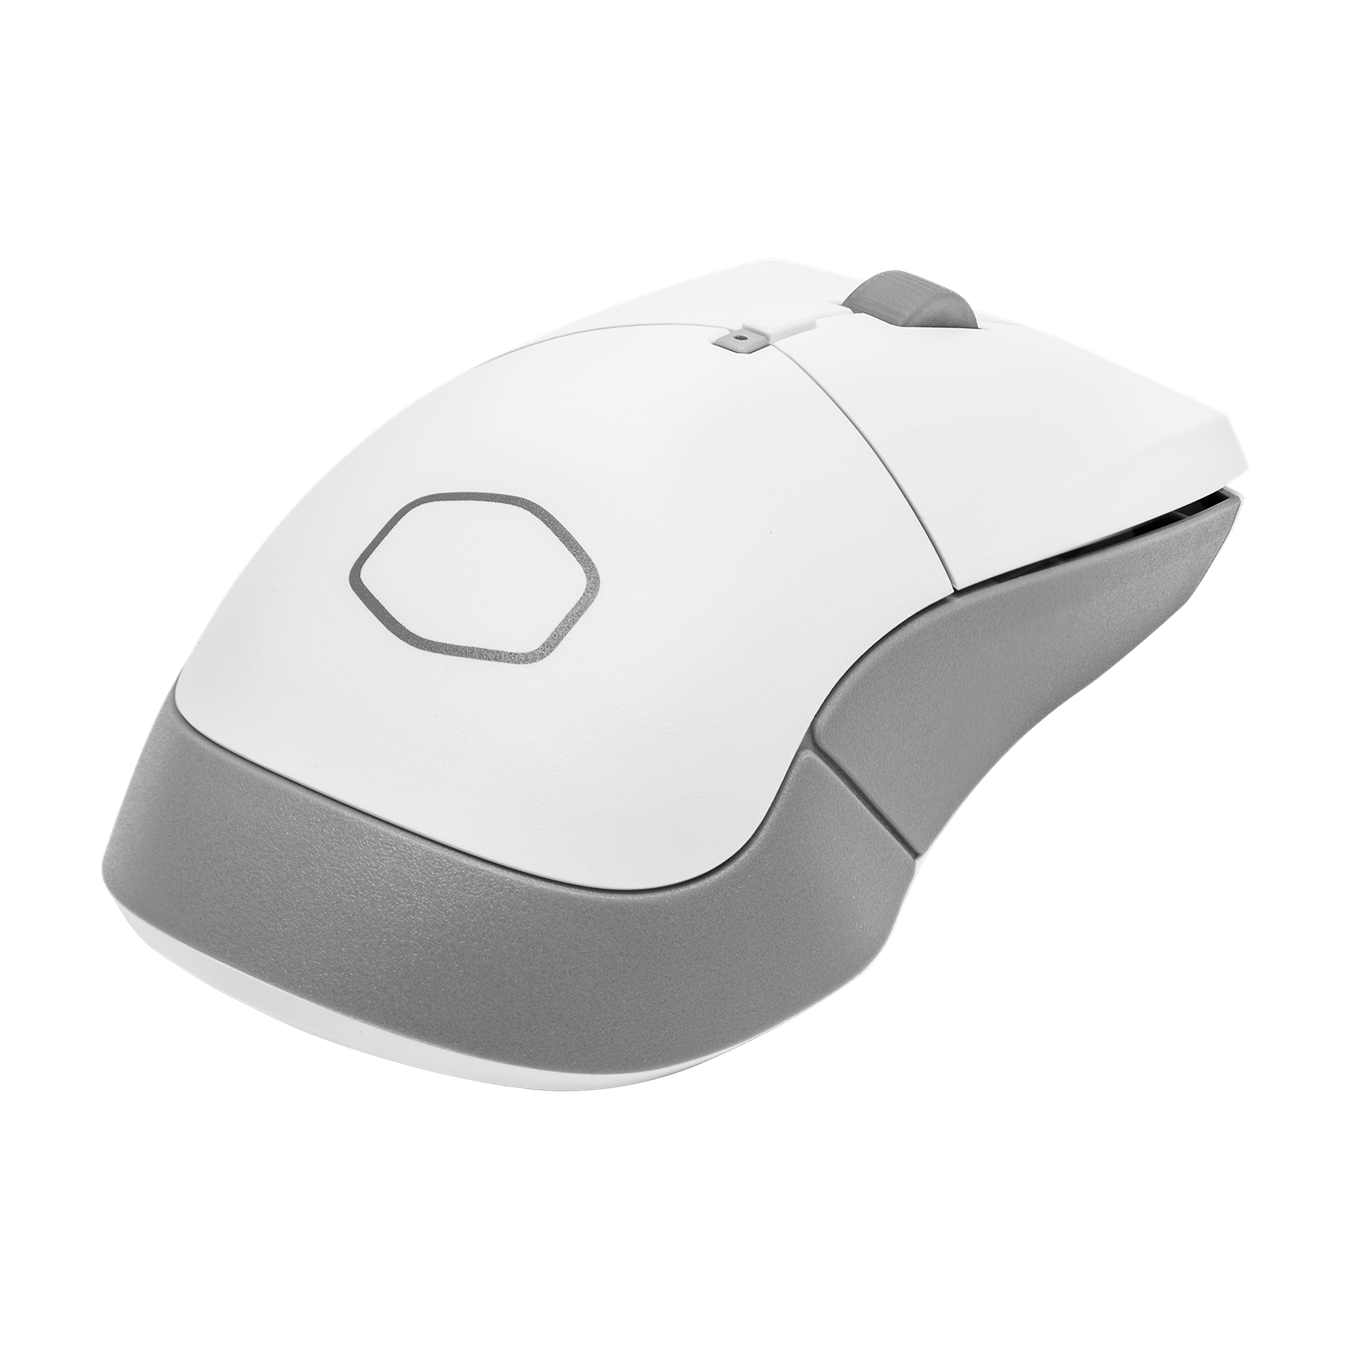 MM311 White Edition Wireless Mouse - With one AA battery, it'll last dozens of sessions without having to worry about dying in the middle of a fight